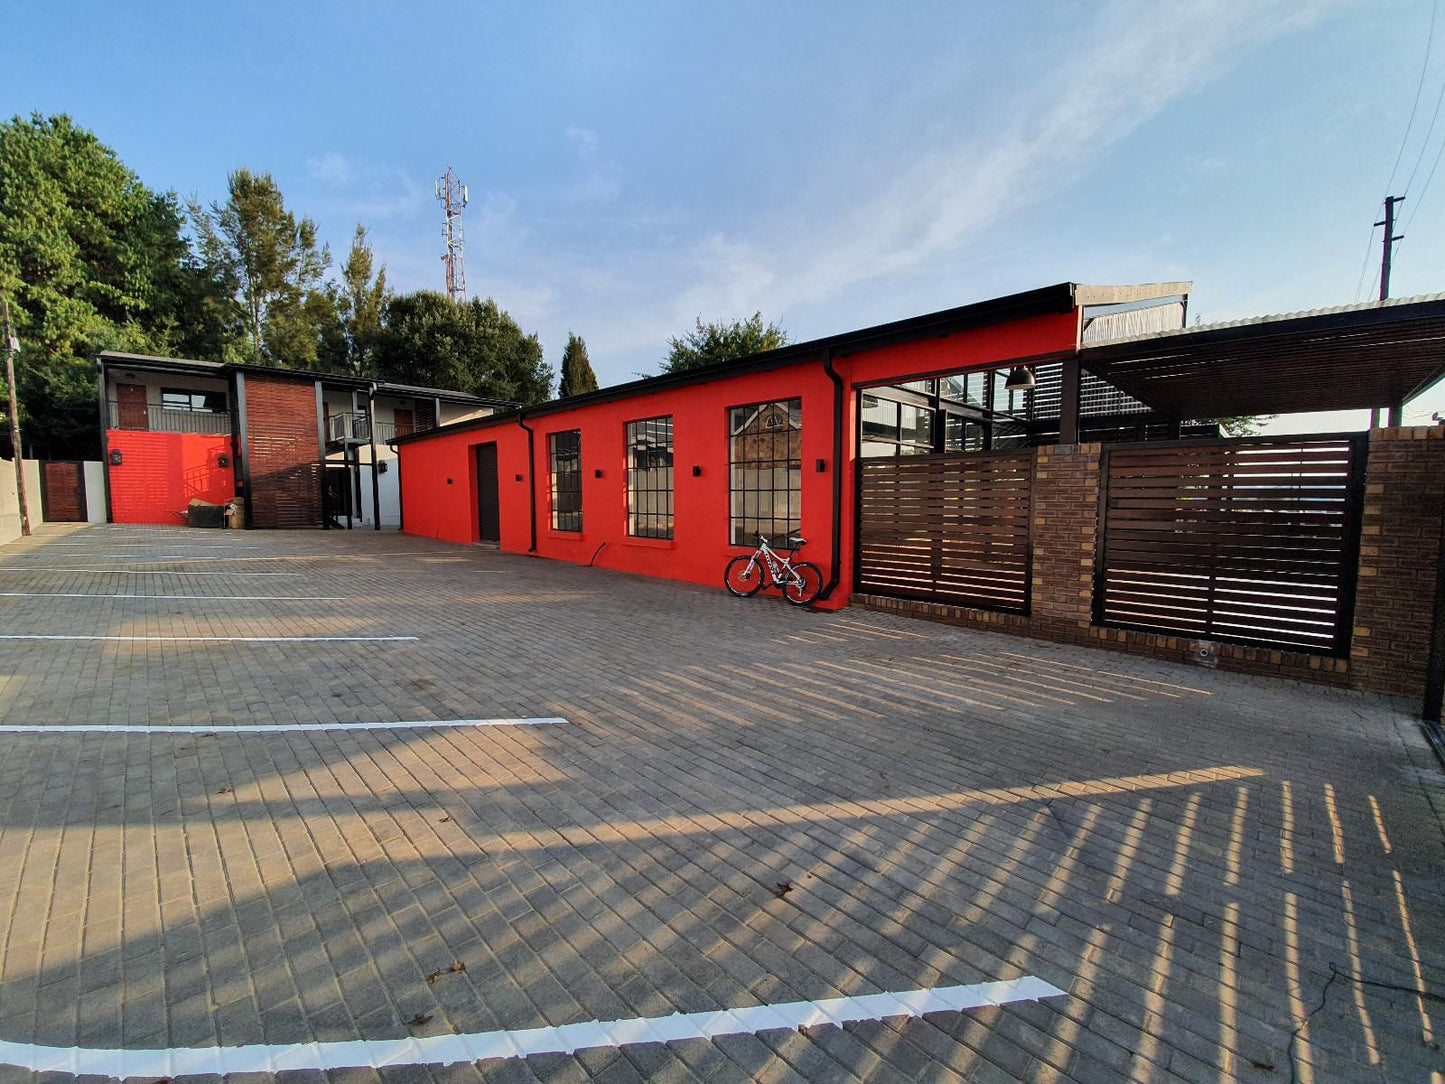 Sleep 84 Dullstroom Mpumalanga South Africa Shipping Container